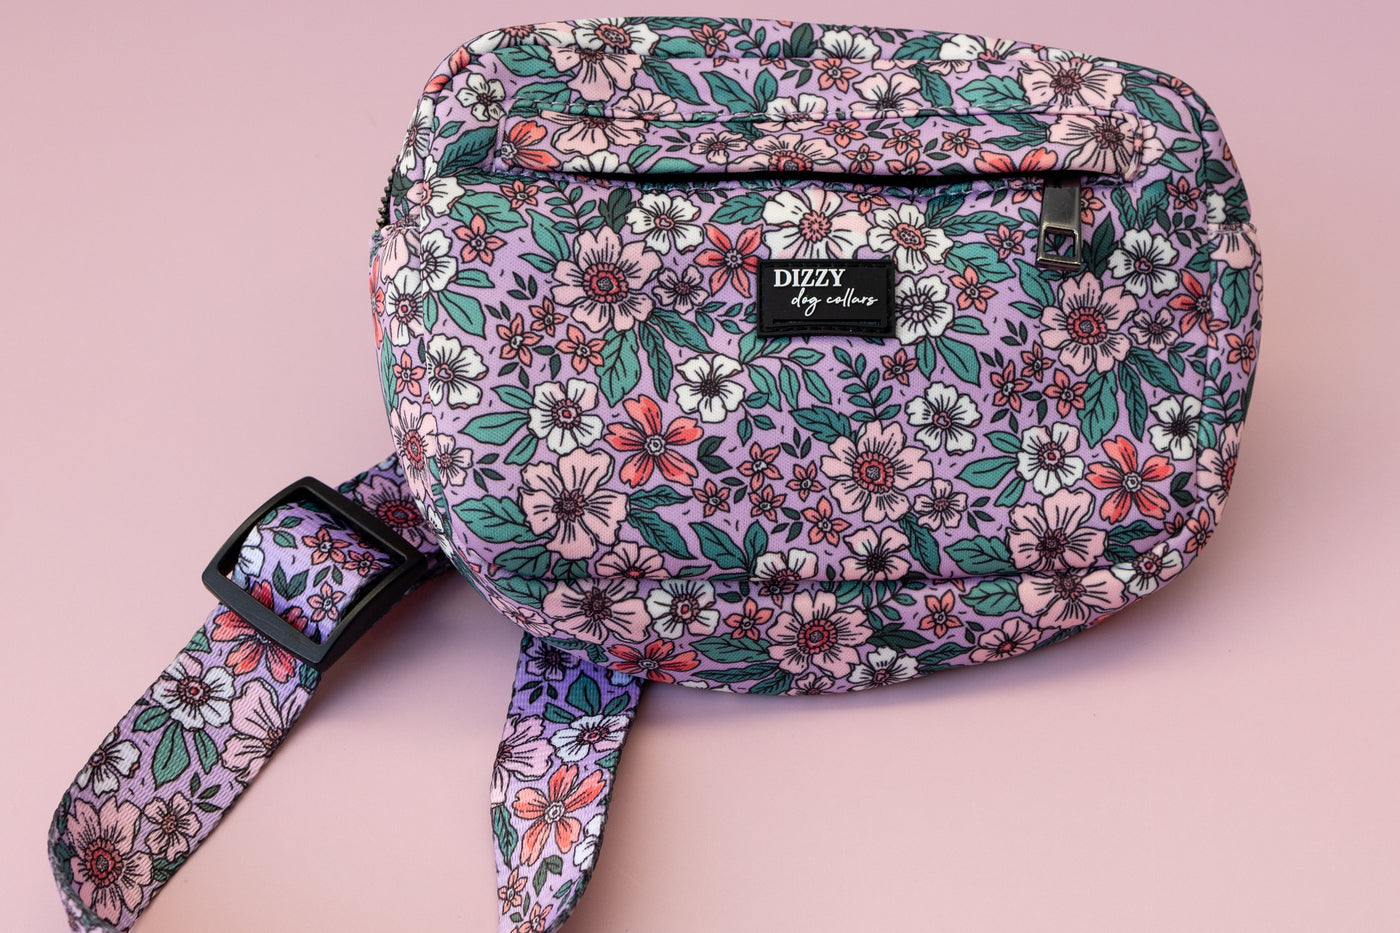 Adventure Pouch - Lilac Floral-Dizzy Dog Collars